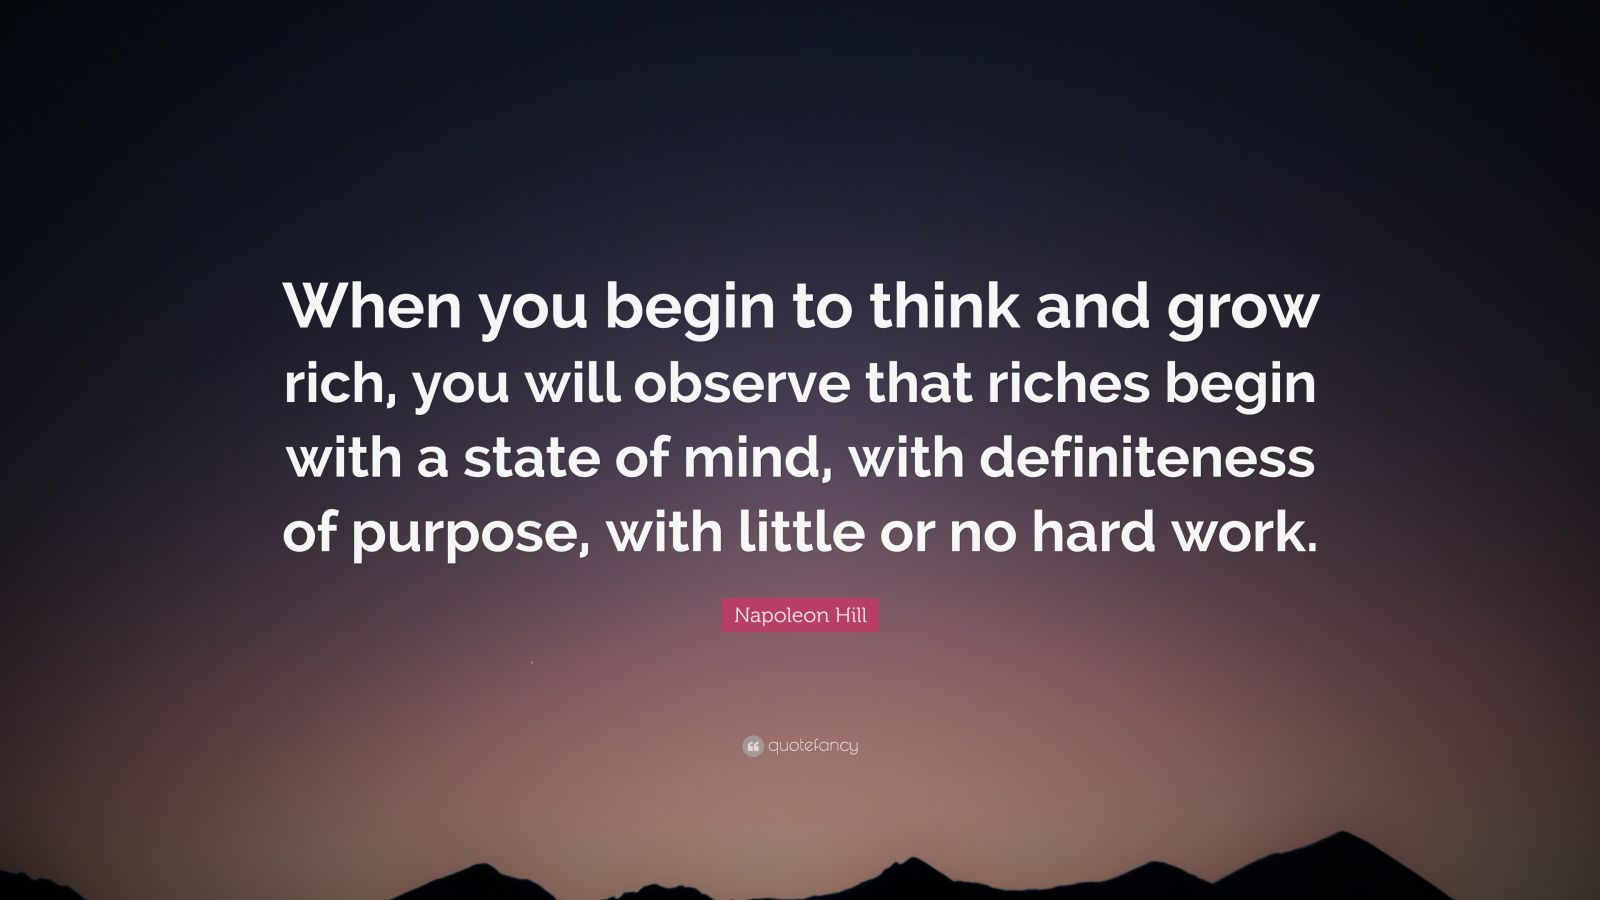 Napoleon Hill Quote “When you begin to think and grow